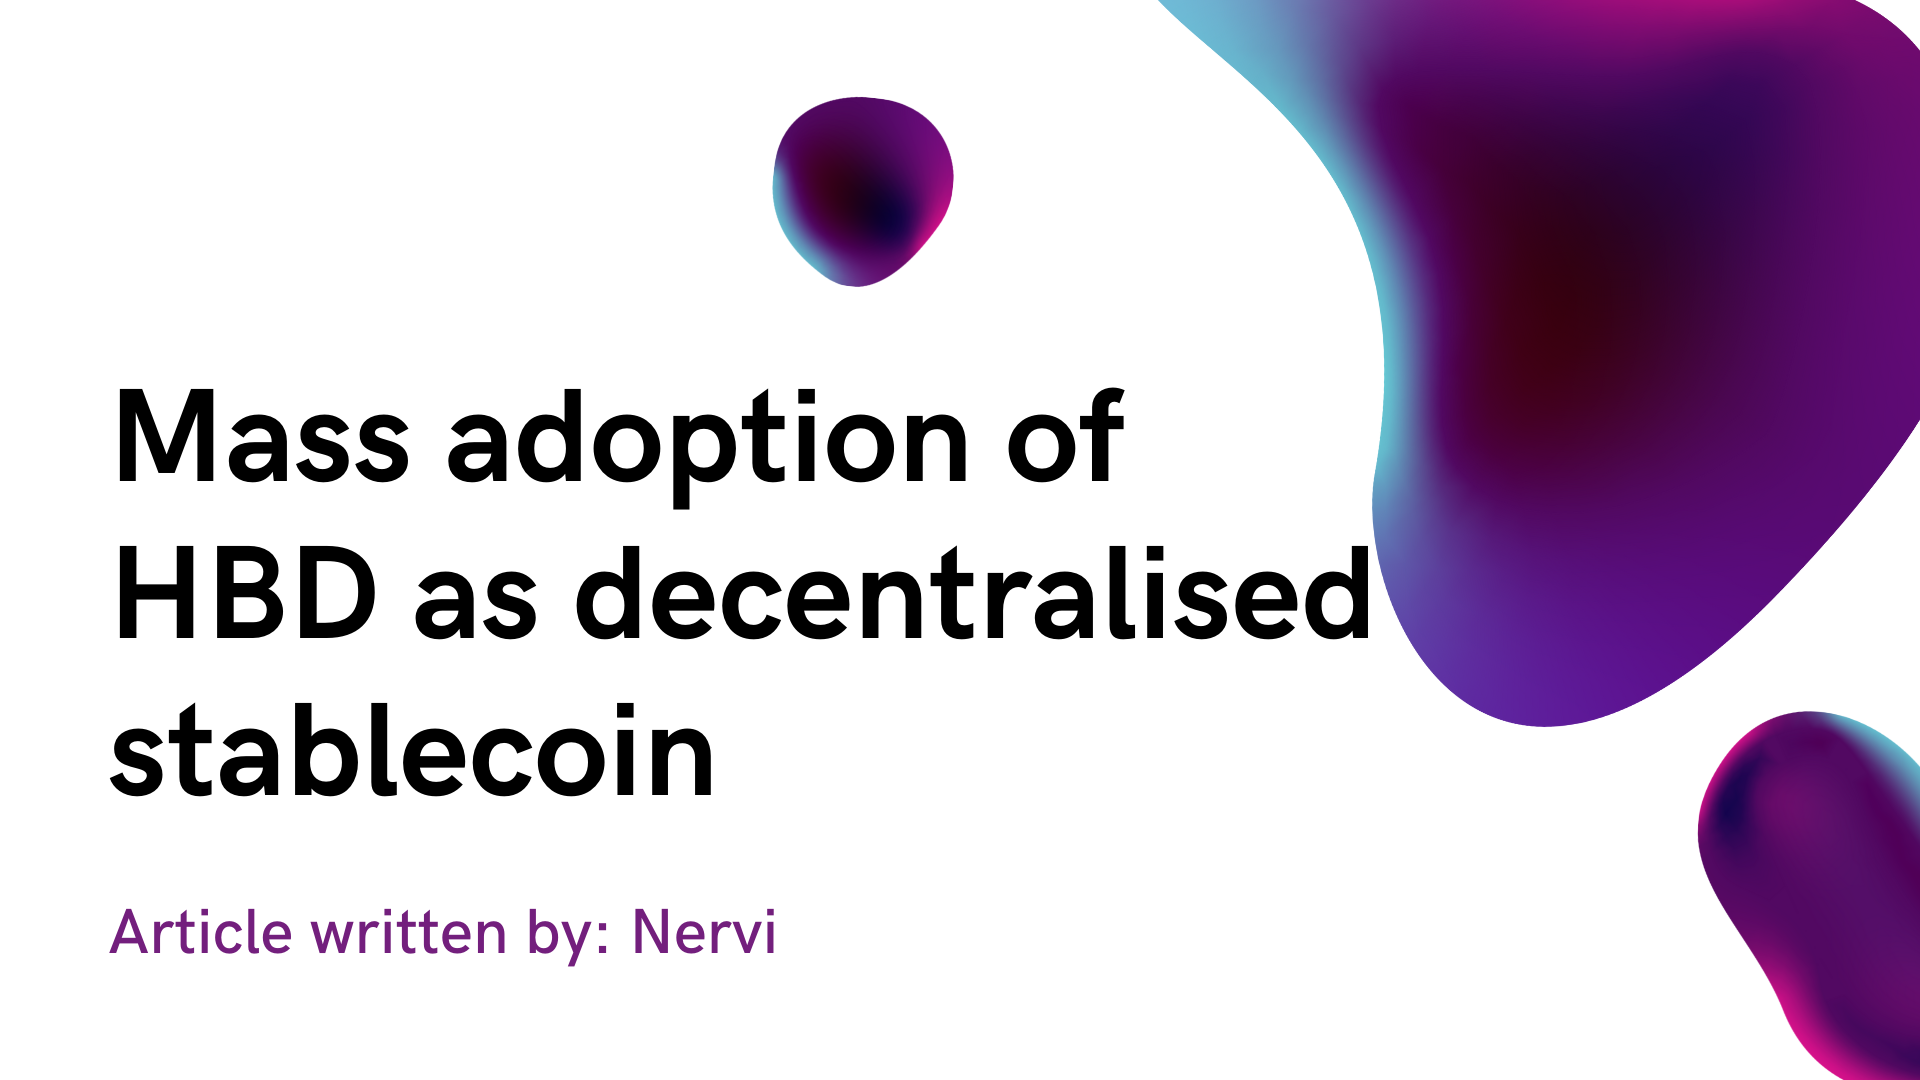 @nervi/mass-adoption-of-hbd-as-decentralised-stablecoin